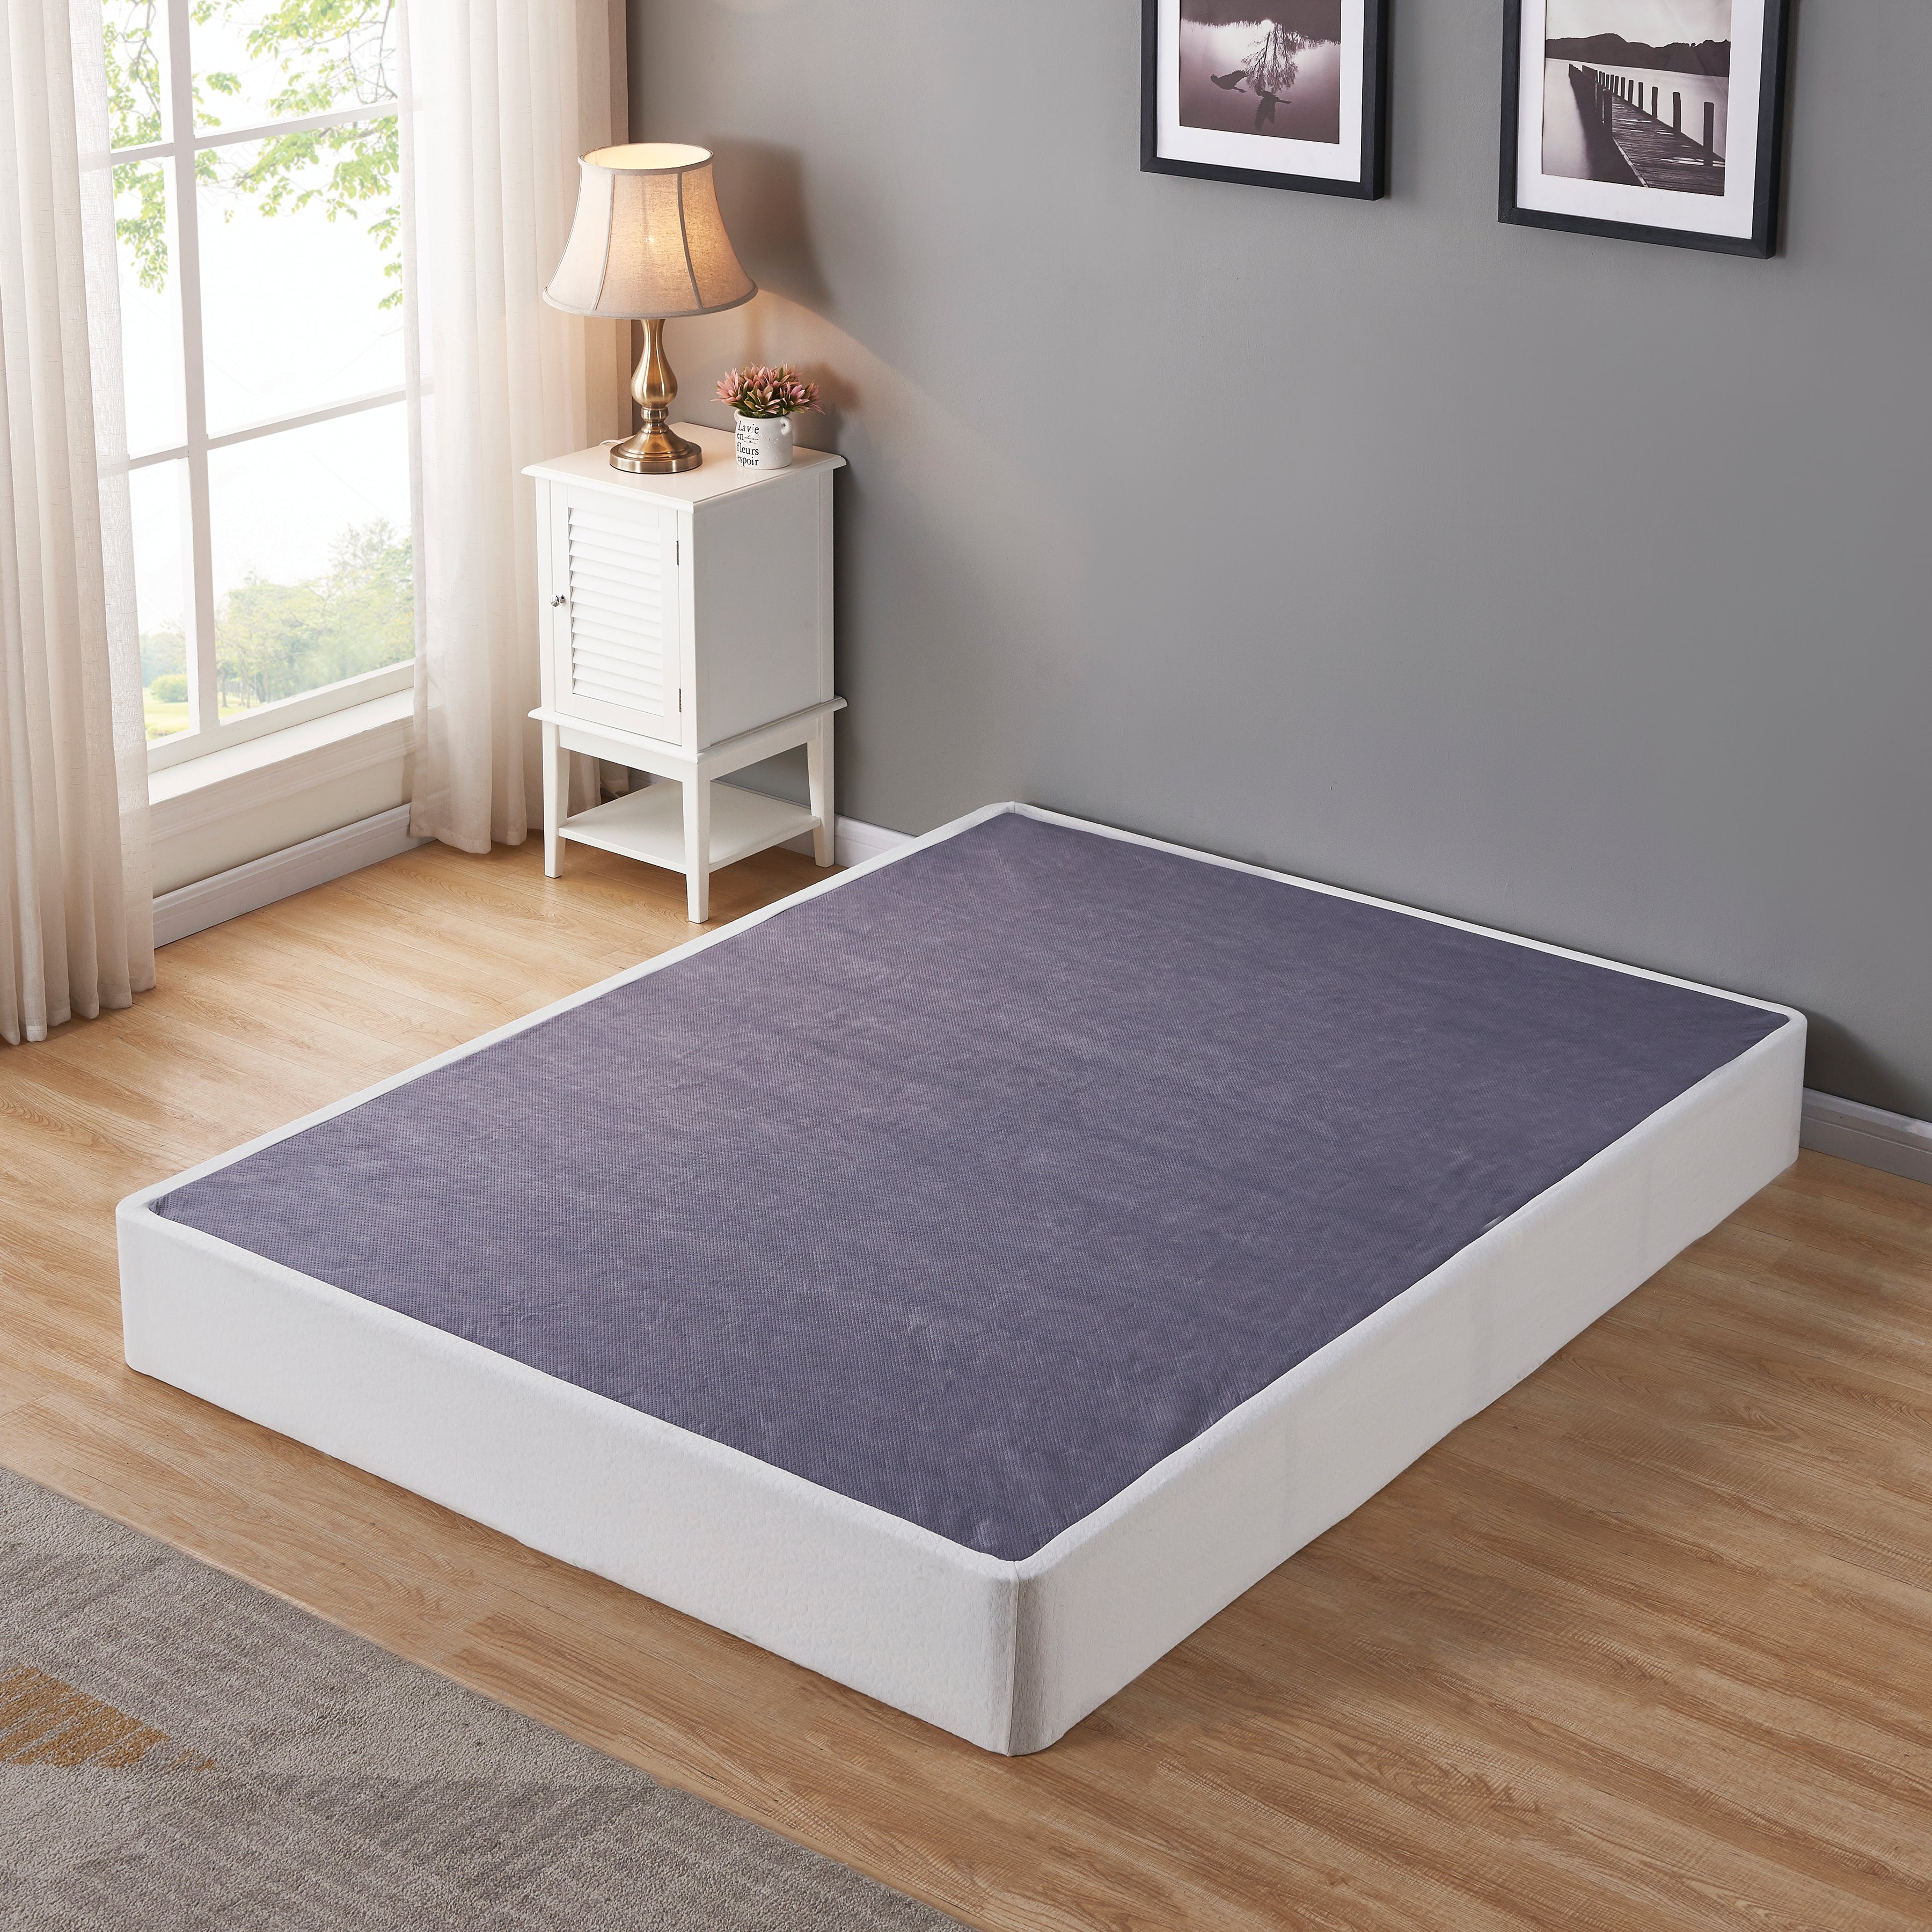 Limited Edition Pillowtop King Mattress with Foundation King Foundation - furniture place usa